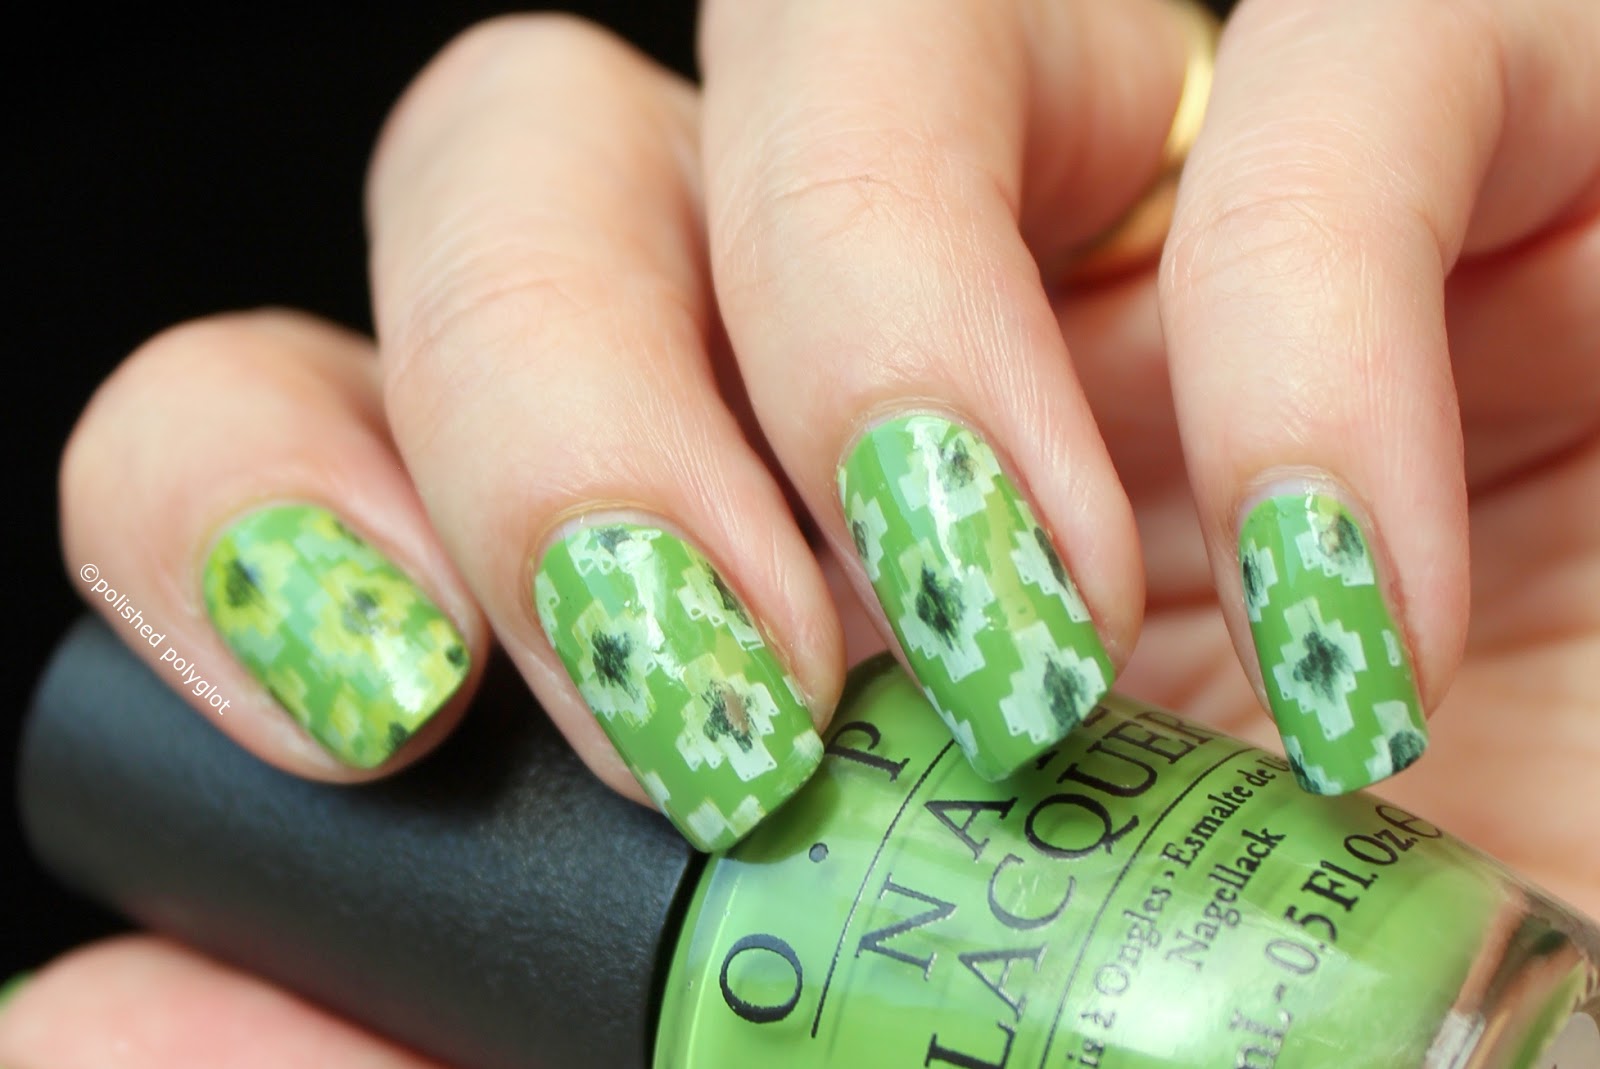 Green Nail Art Designs on Tumblr - wide 5